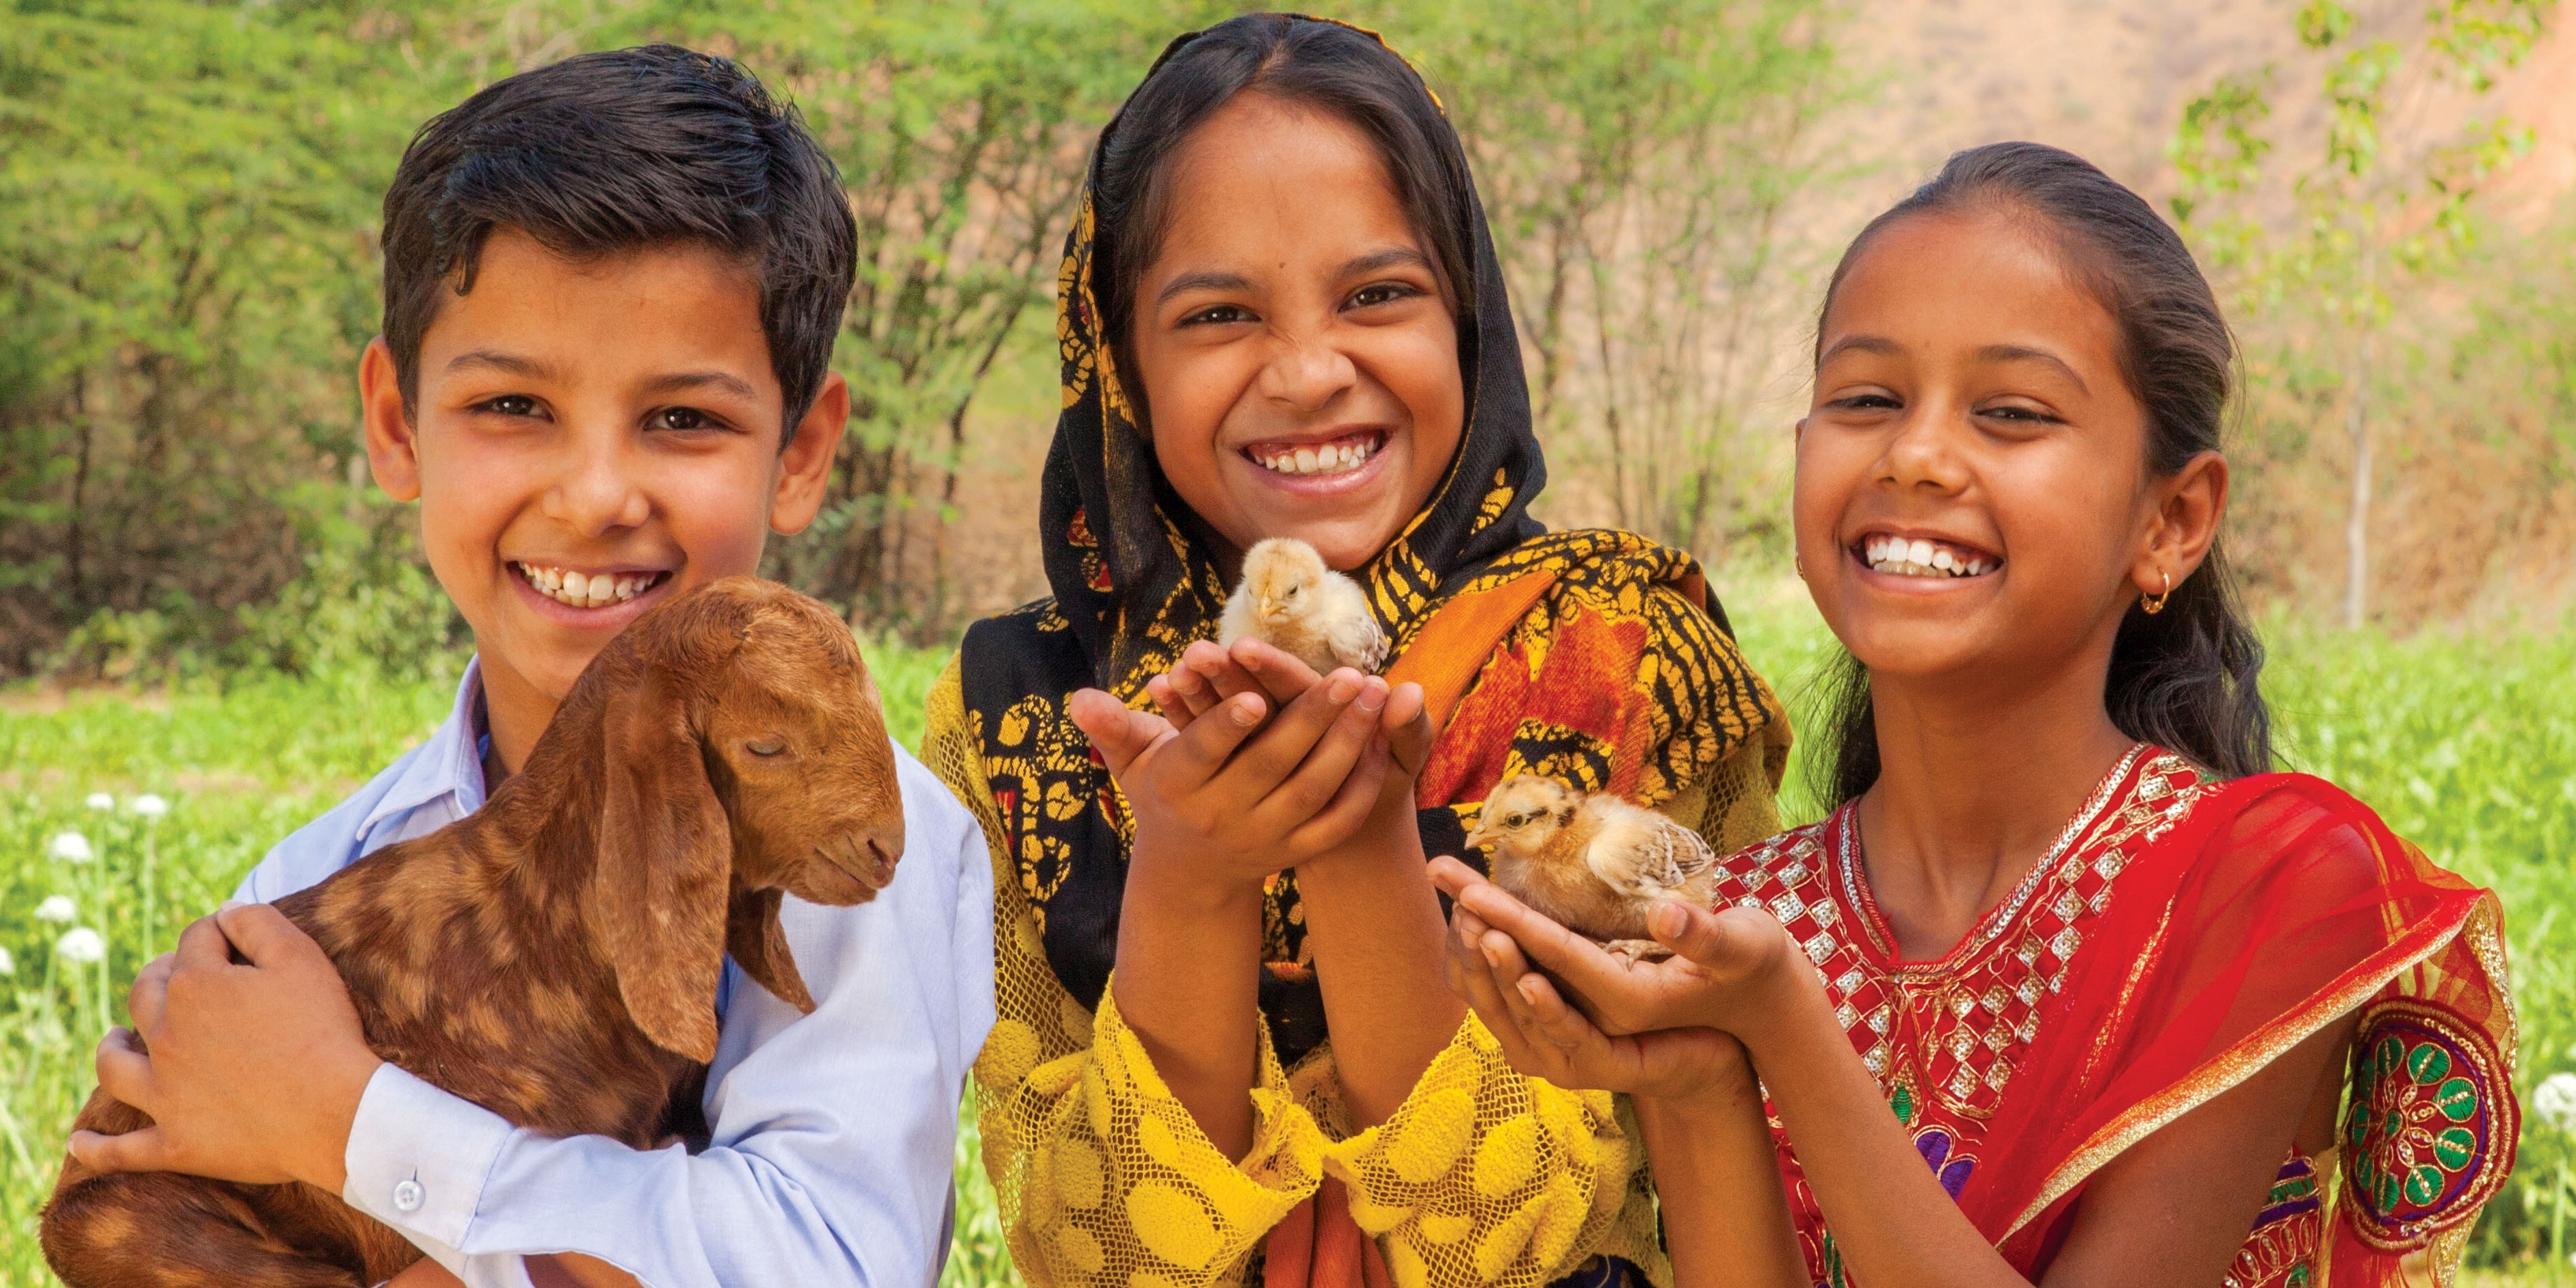 A great way to donate! Chickens and goats give much-needed protein to help maintain the health of children. When additional animals arrive, so do more milk and eggs, giving families a way to earn income. Photo Credit: Jordan J. Hay/Save the Children 2016.